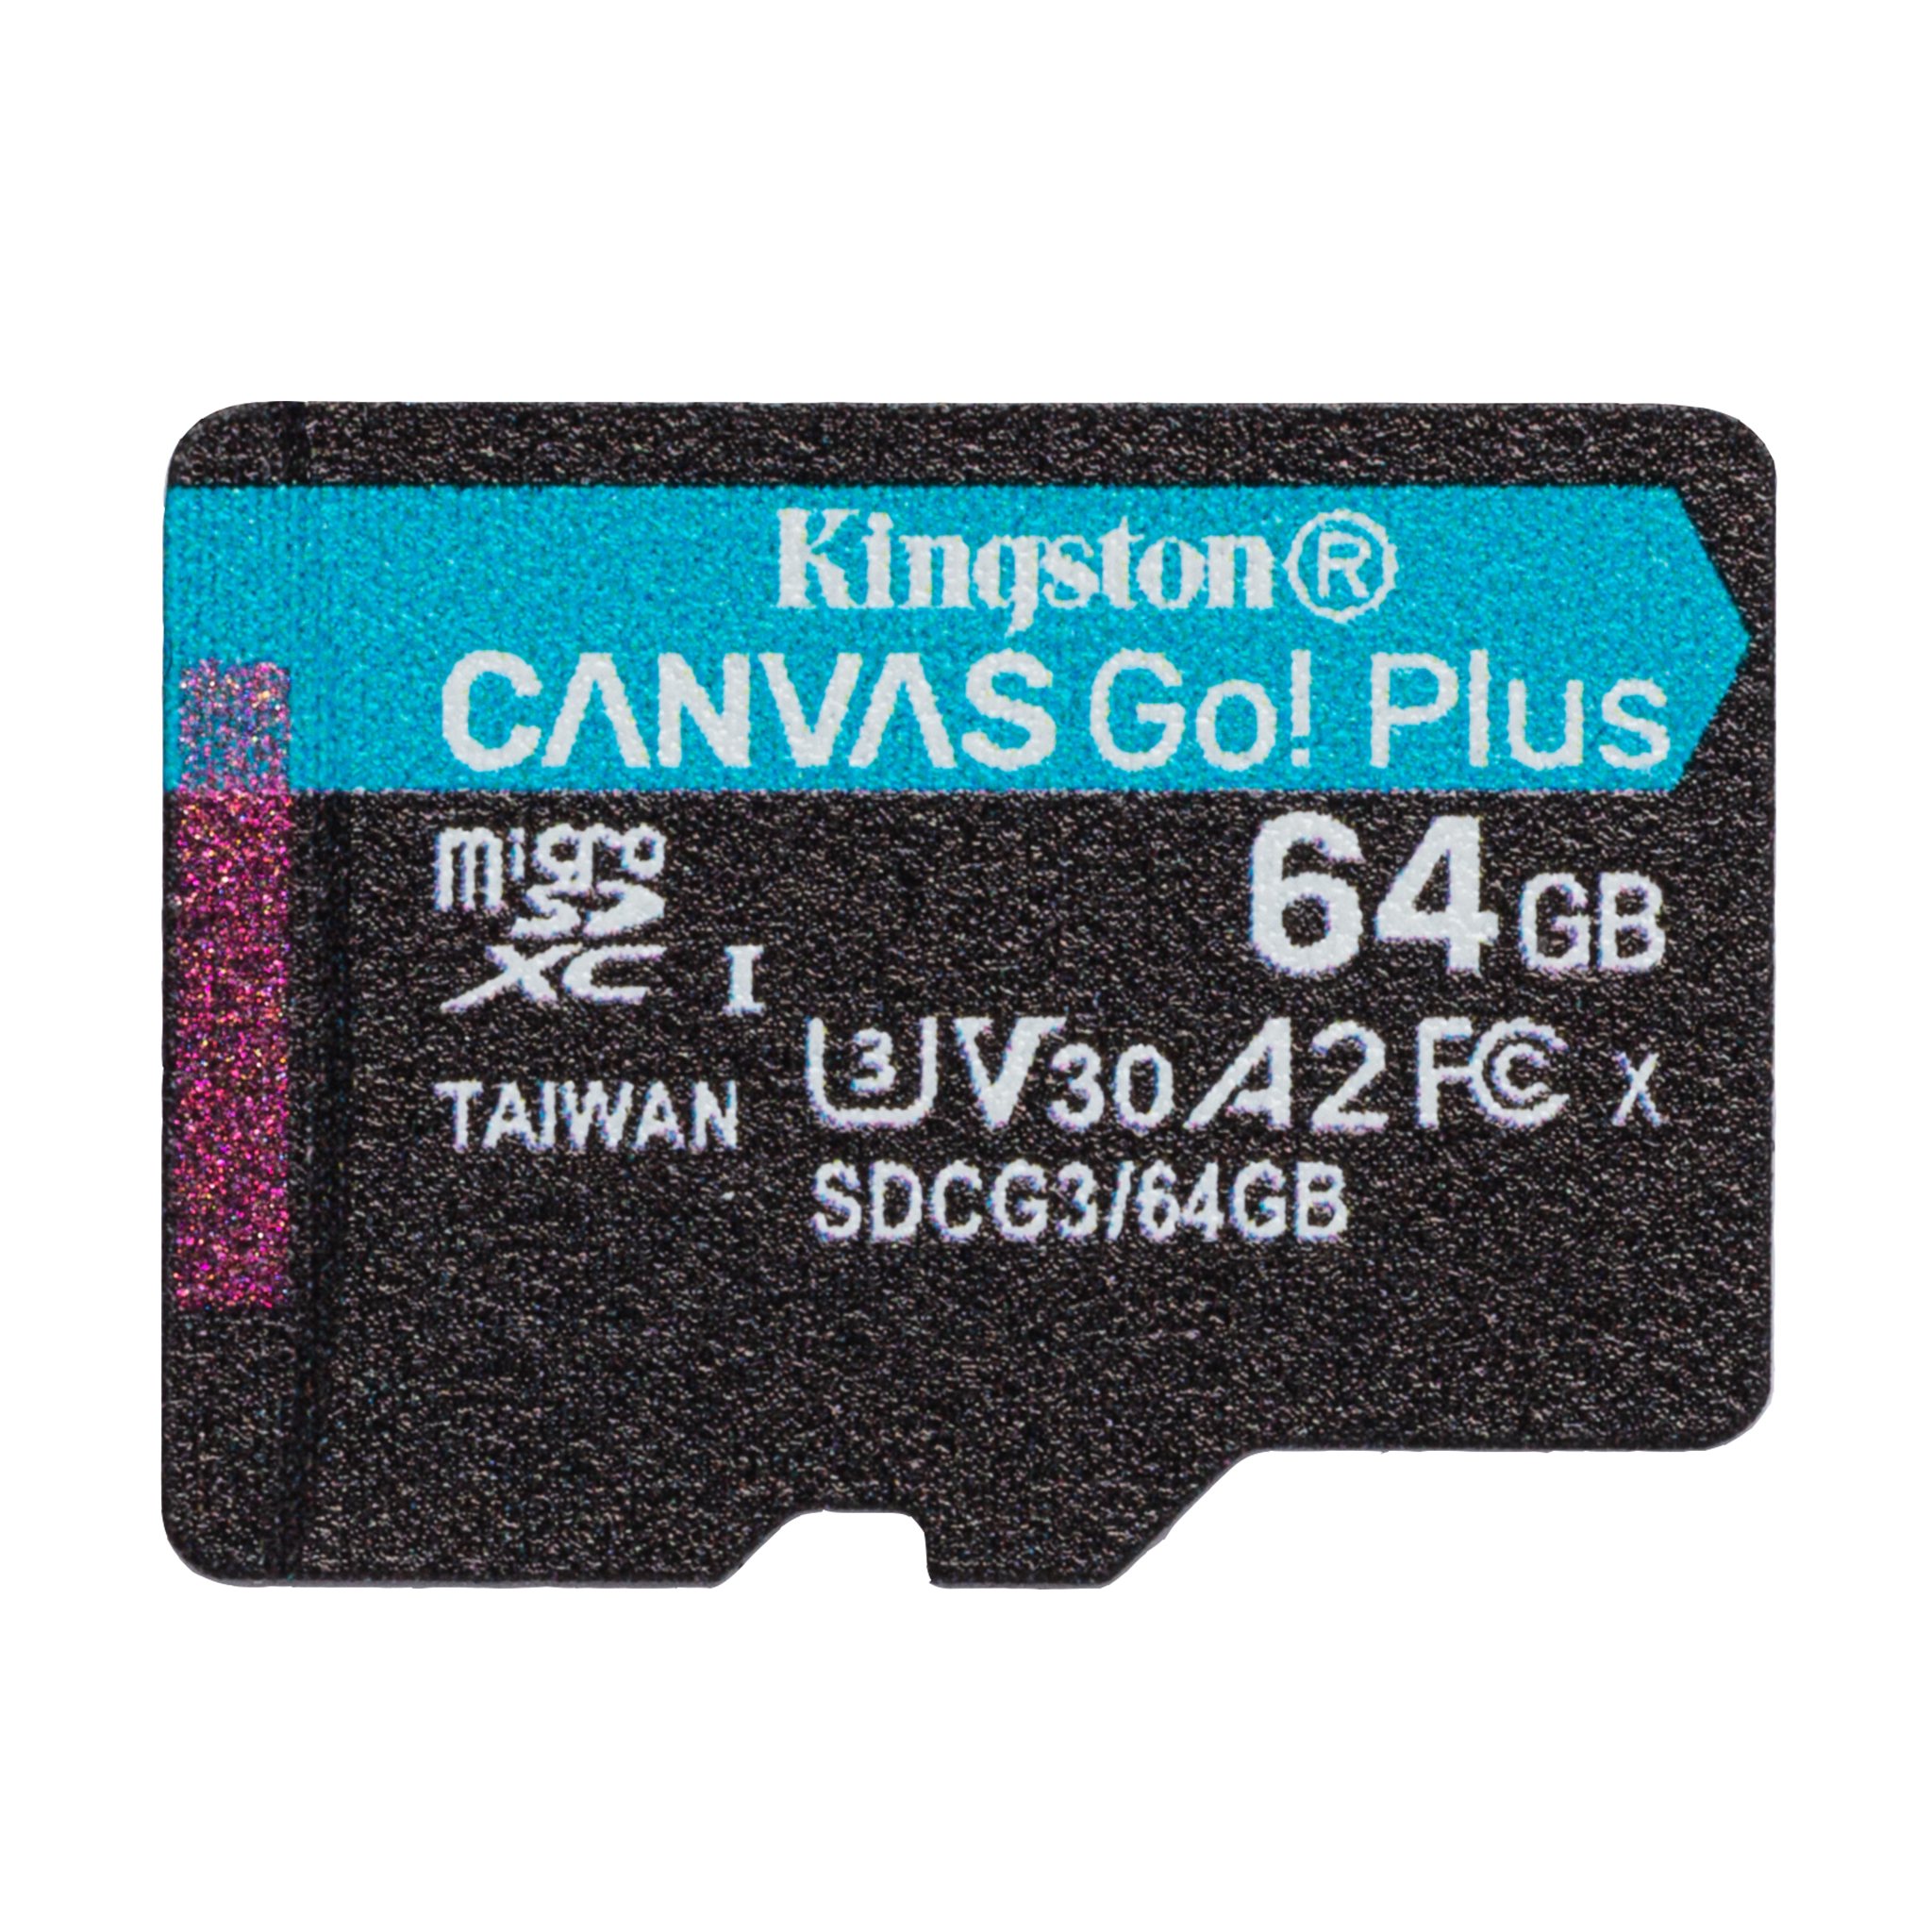 Kingston 64GB Samsung SM-A500G MicroSDXC Canvas Select Plus Card Verified by SanFlash. 100MBs Works with Kingston